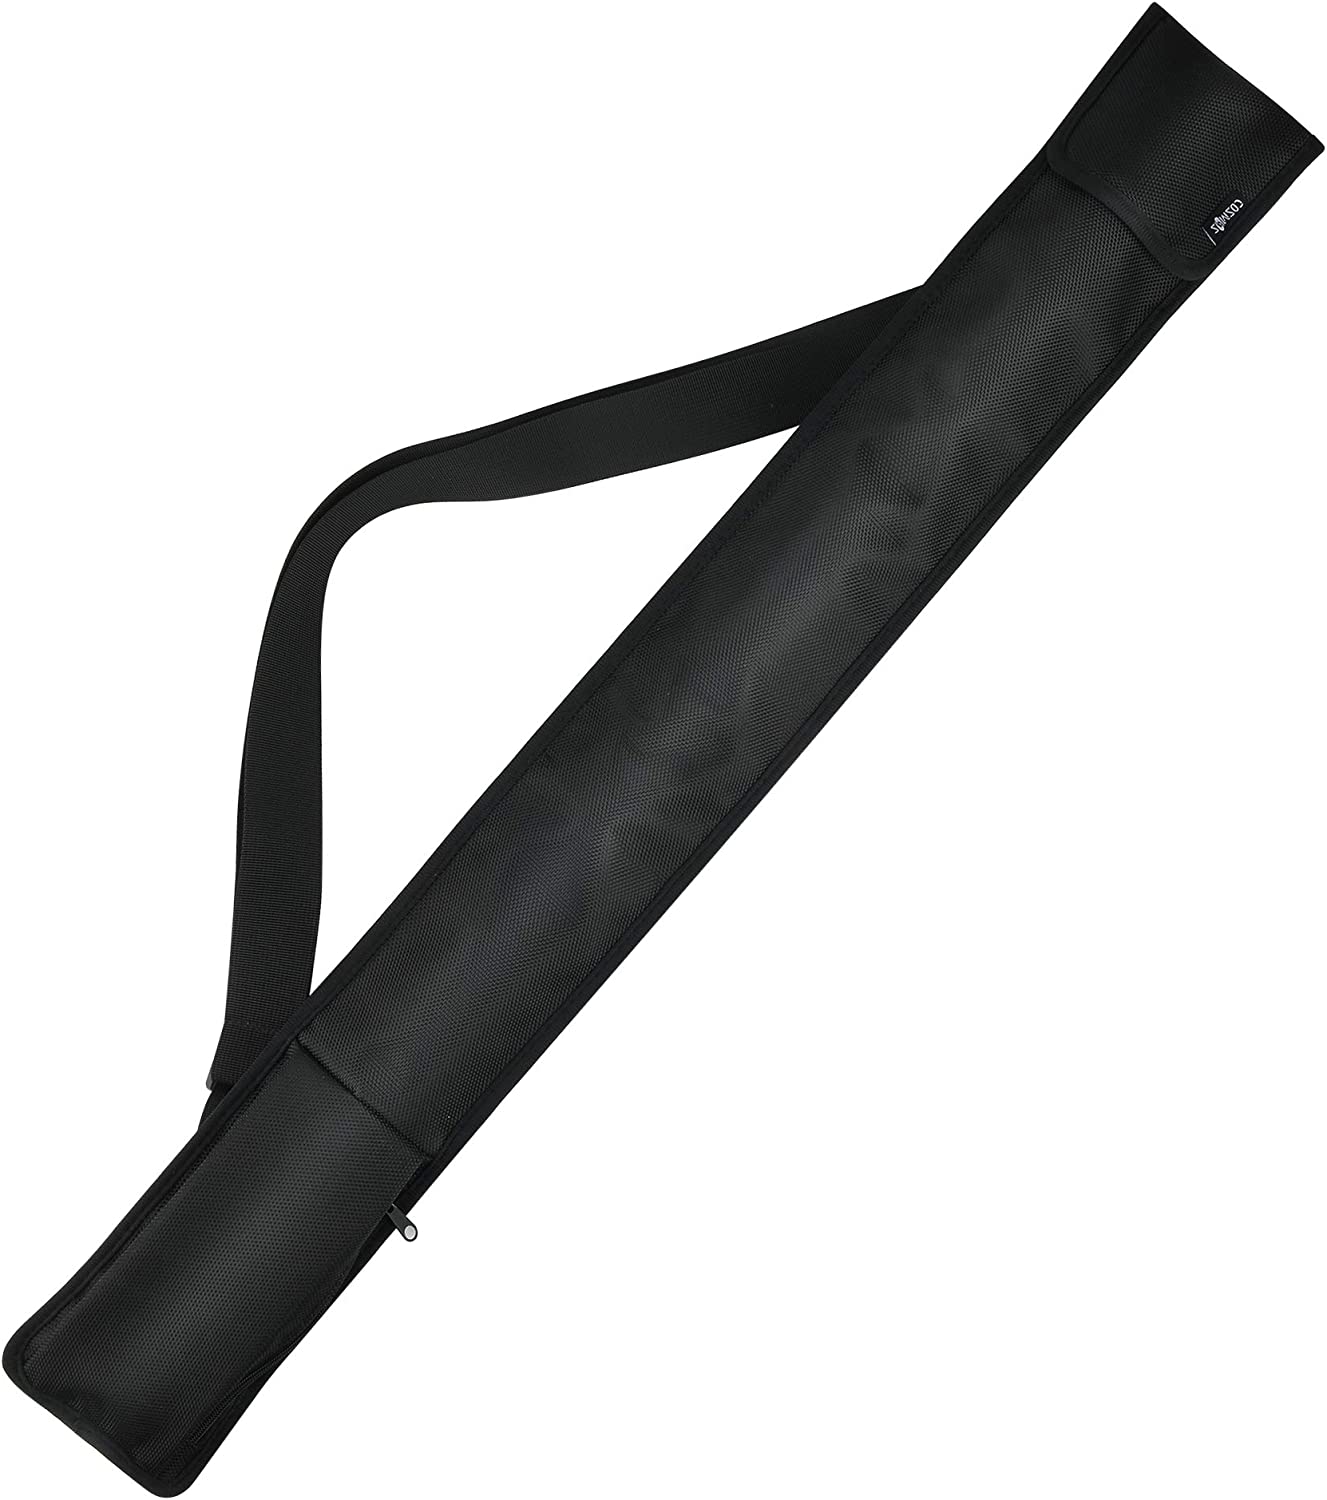 Carrying Case Bag for 1/2 Billiard Pool Cue Stick (Holds 1 Butt / 1 Shaft)